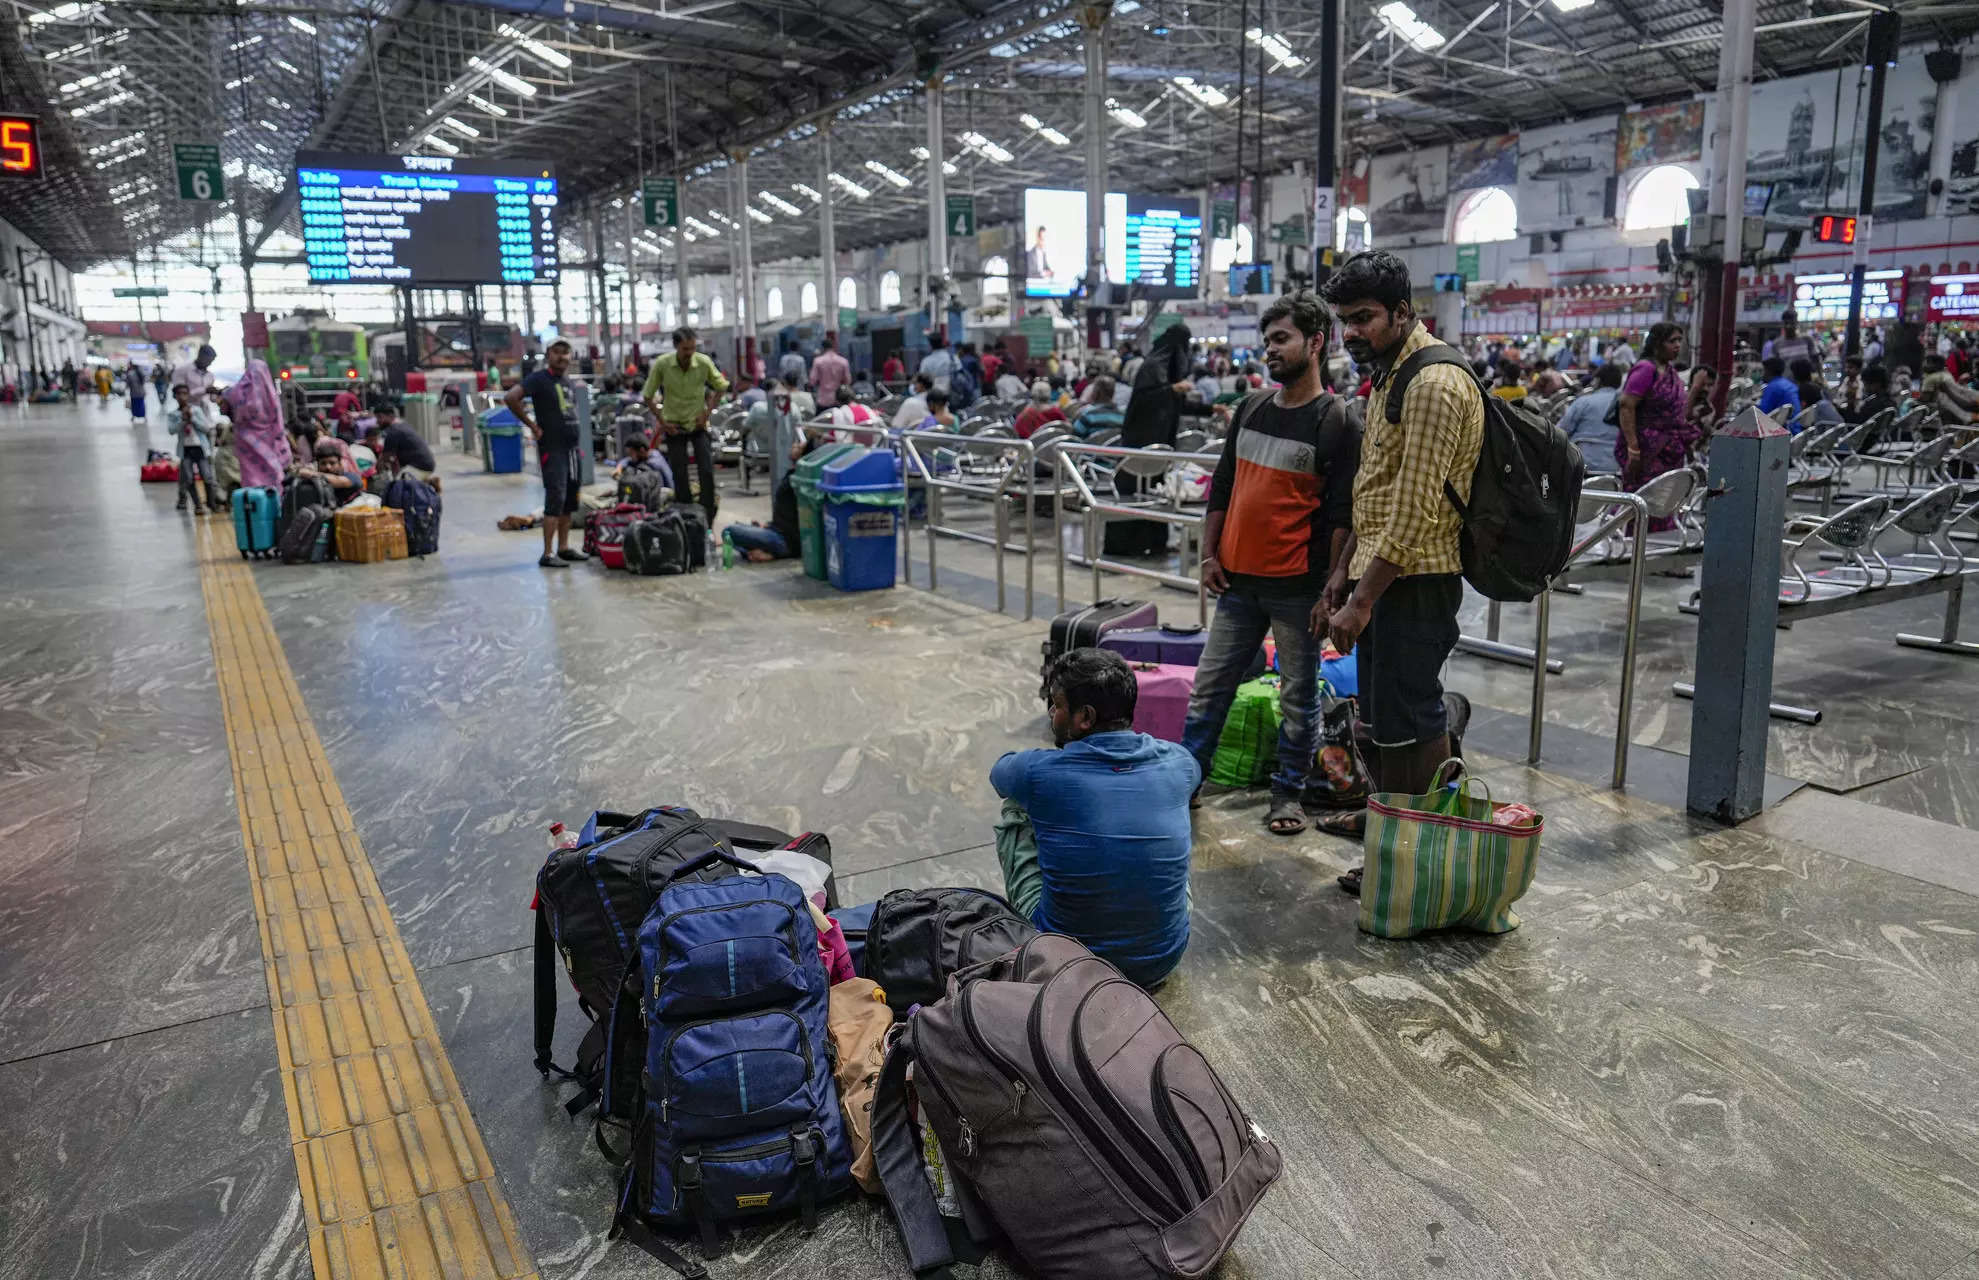 <p>Chennai: Passengers at Central Railway Station after several trains were cancelled following an accident involving three trains in Odisha's Balasore, in Chennai. (PTI Photo/R Senthil Kumar)(</p>